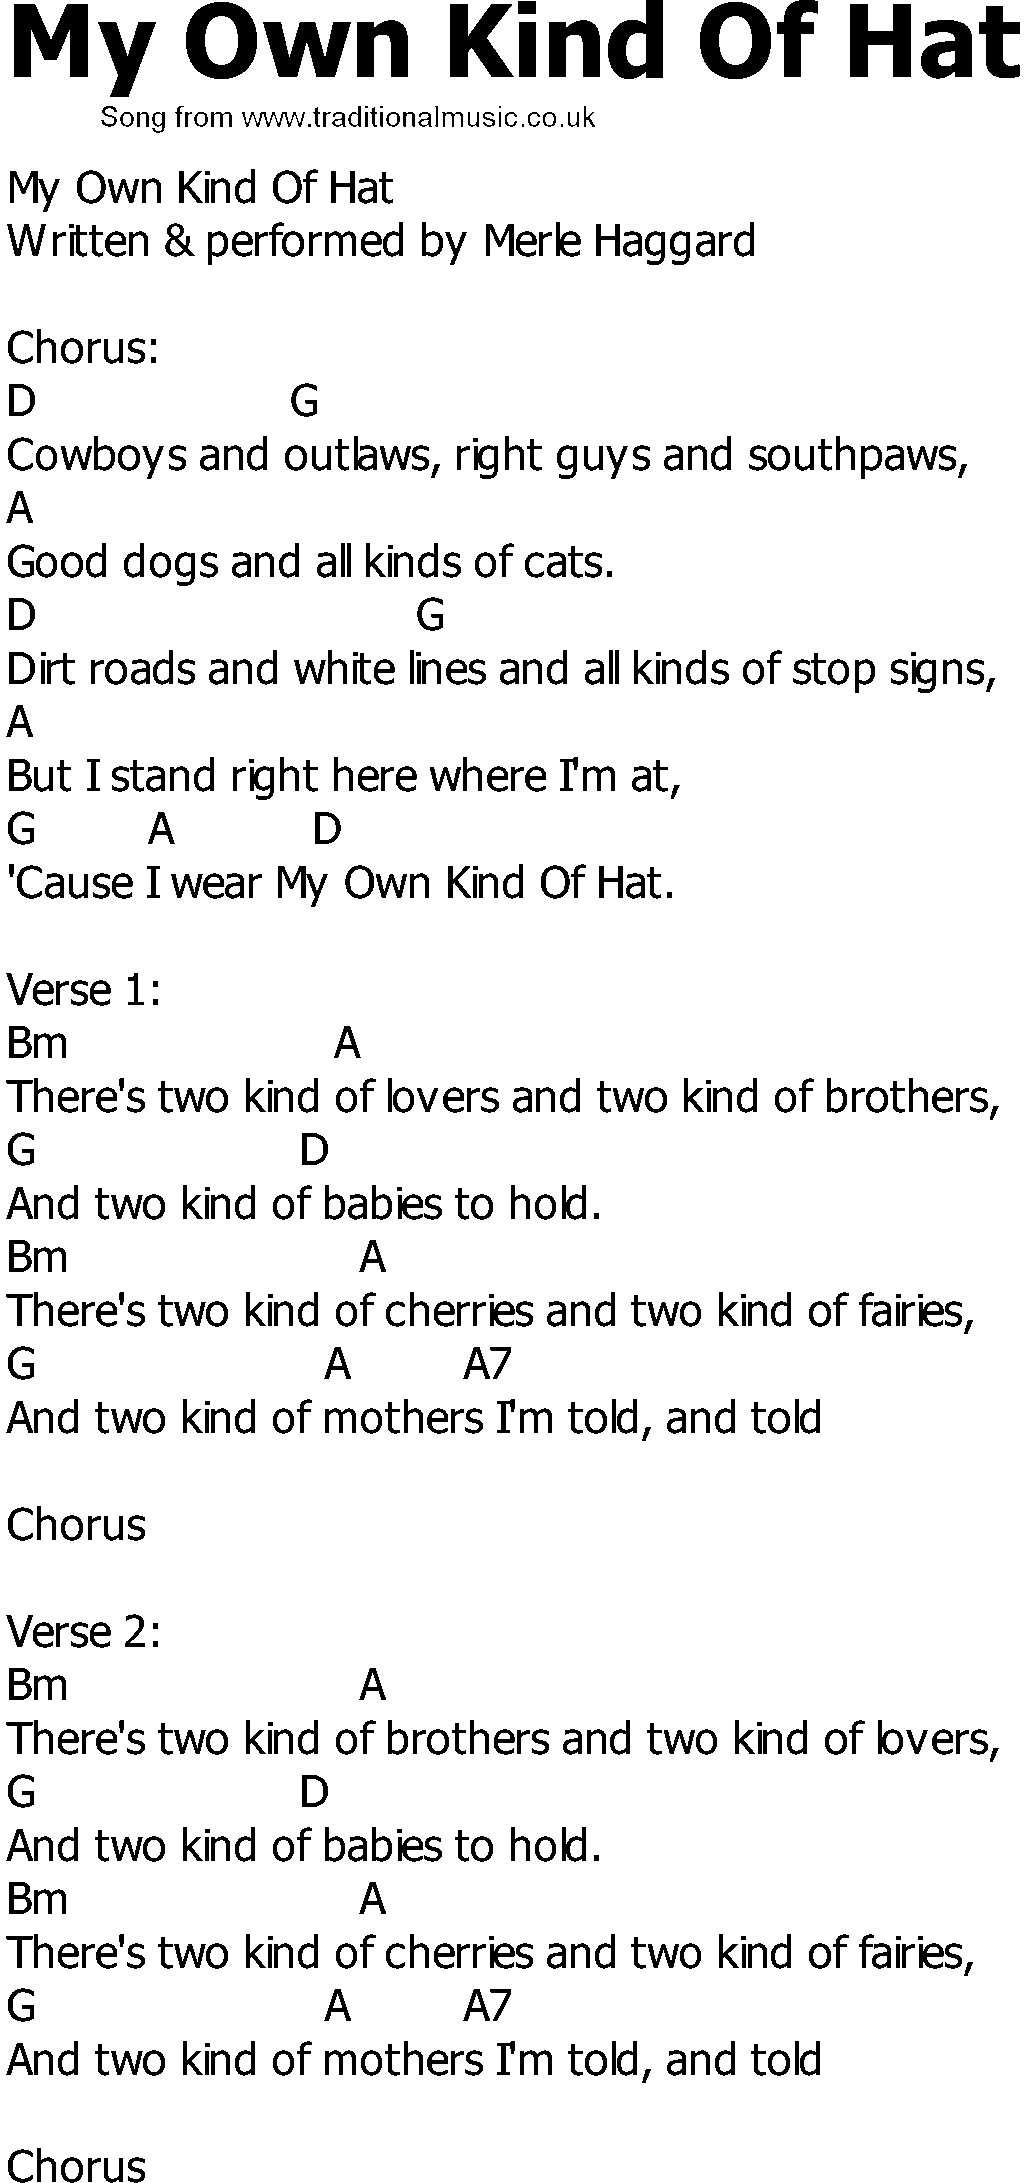 Old Country song lyrics with chords - My Own Kind Of Hat